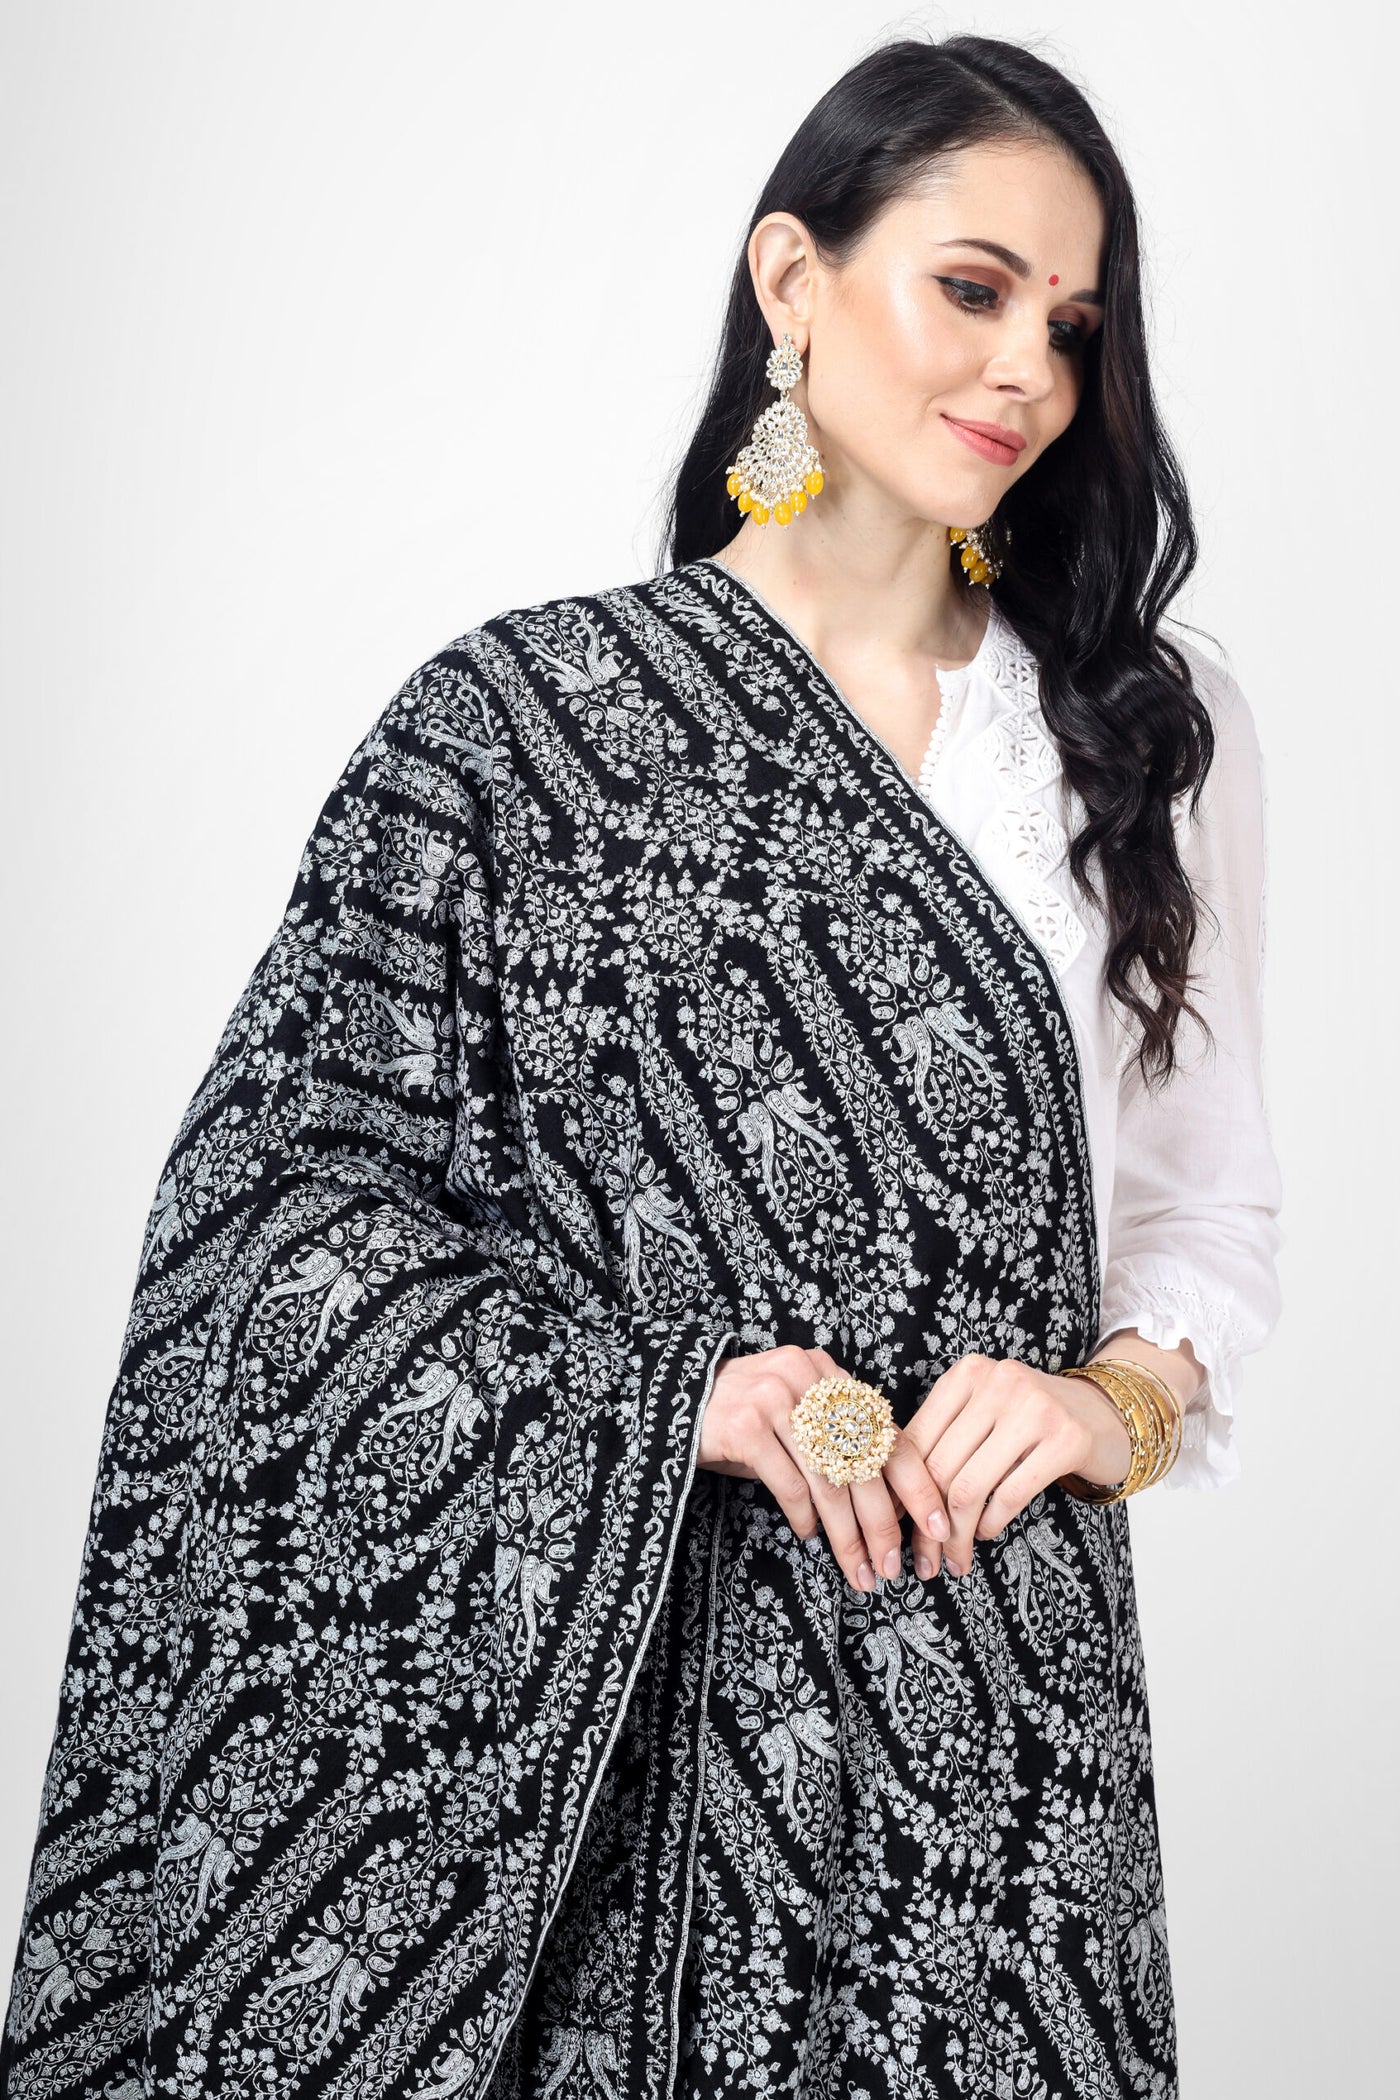 PASHMINA SHAWL ONLINE  -Shop the exquisite Black Pashmina Mehraab Sozni Jama Shawl with intricate embroidery and designs. Hand-embroidered and made from high-quality pashmina wool.